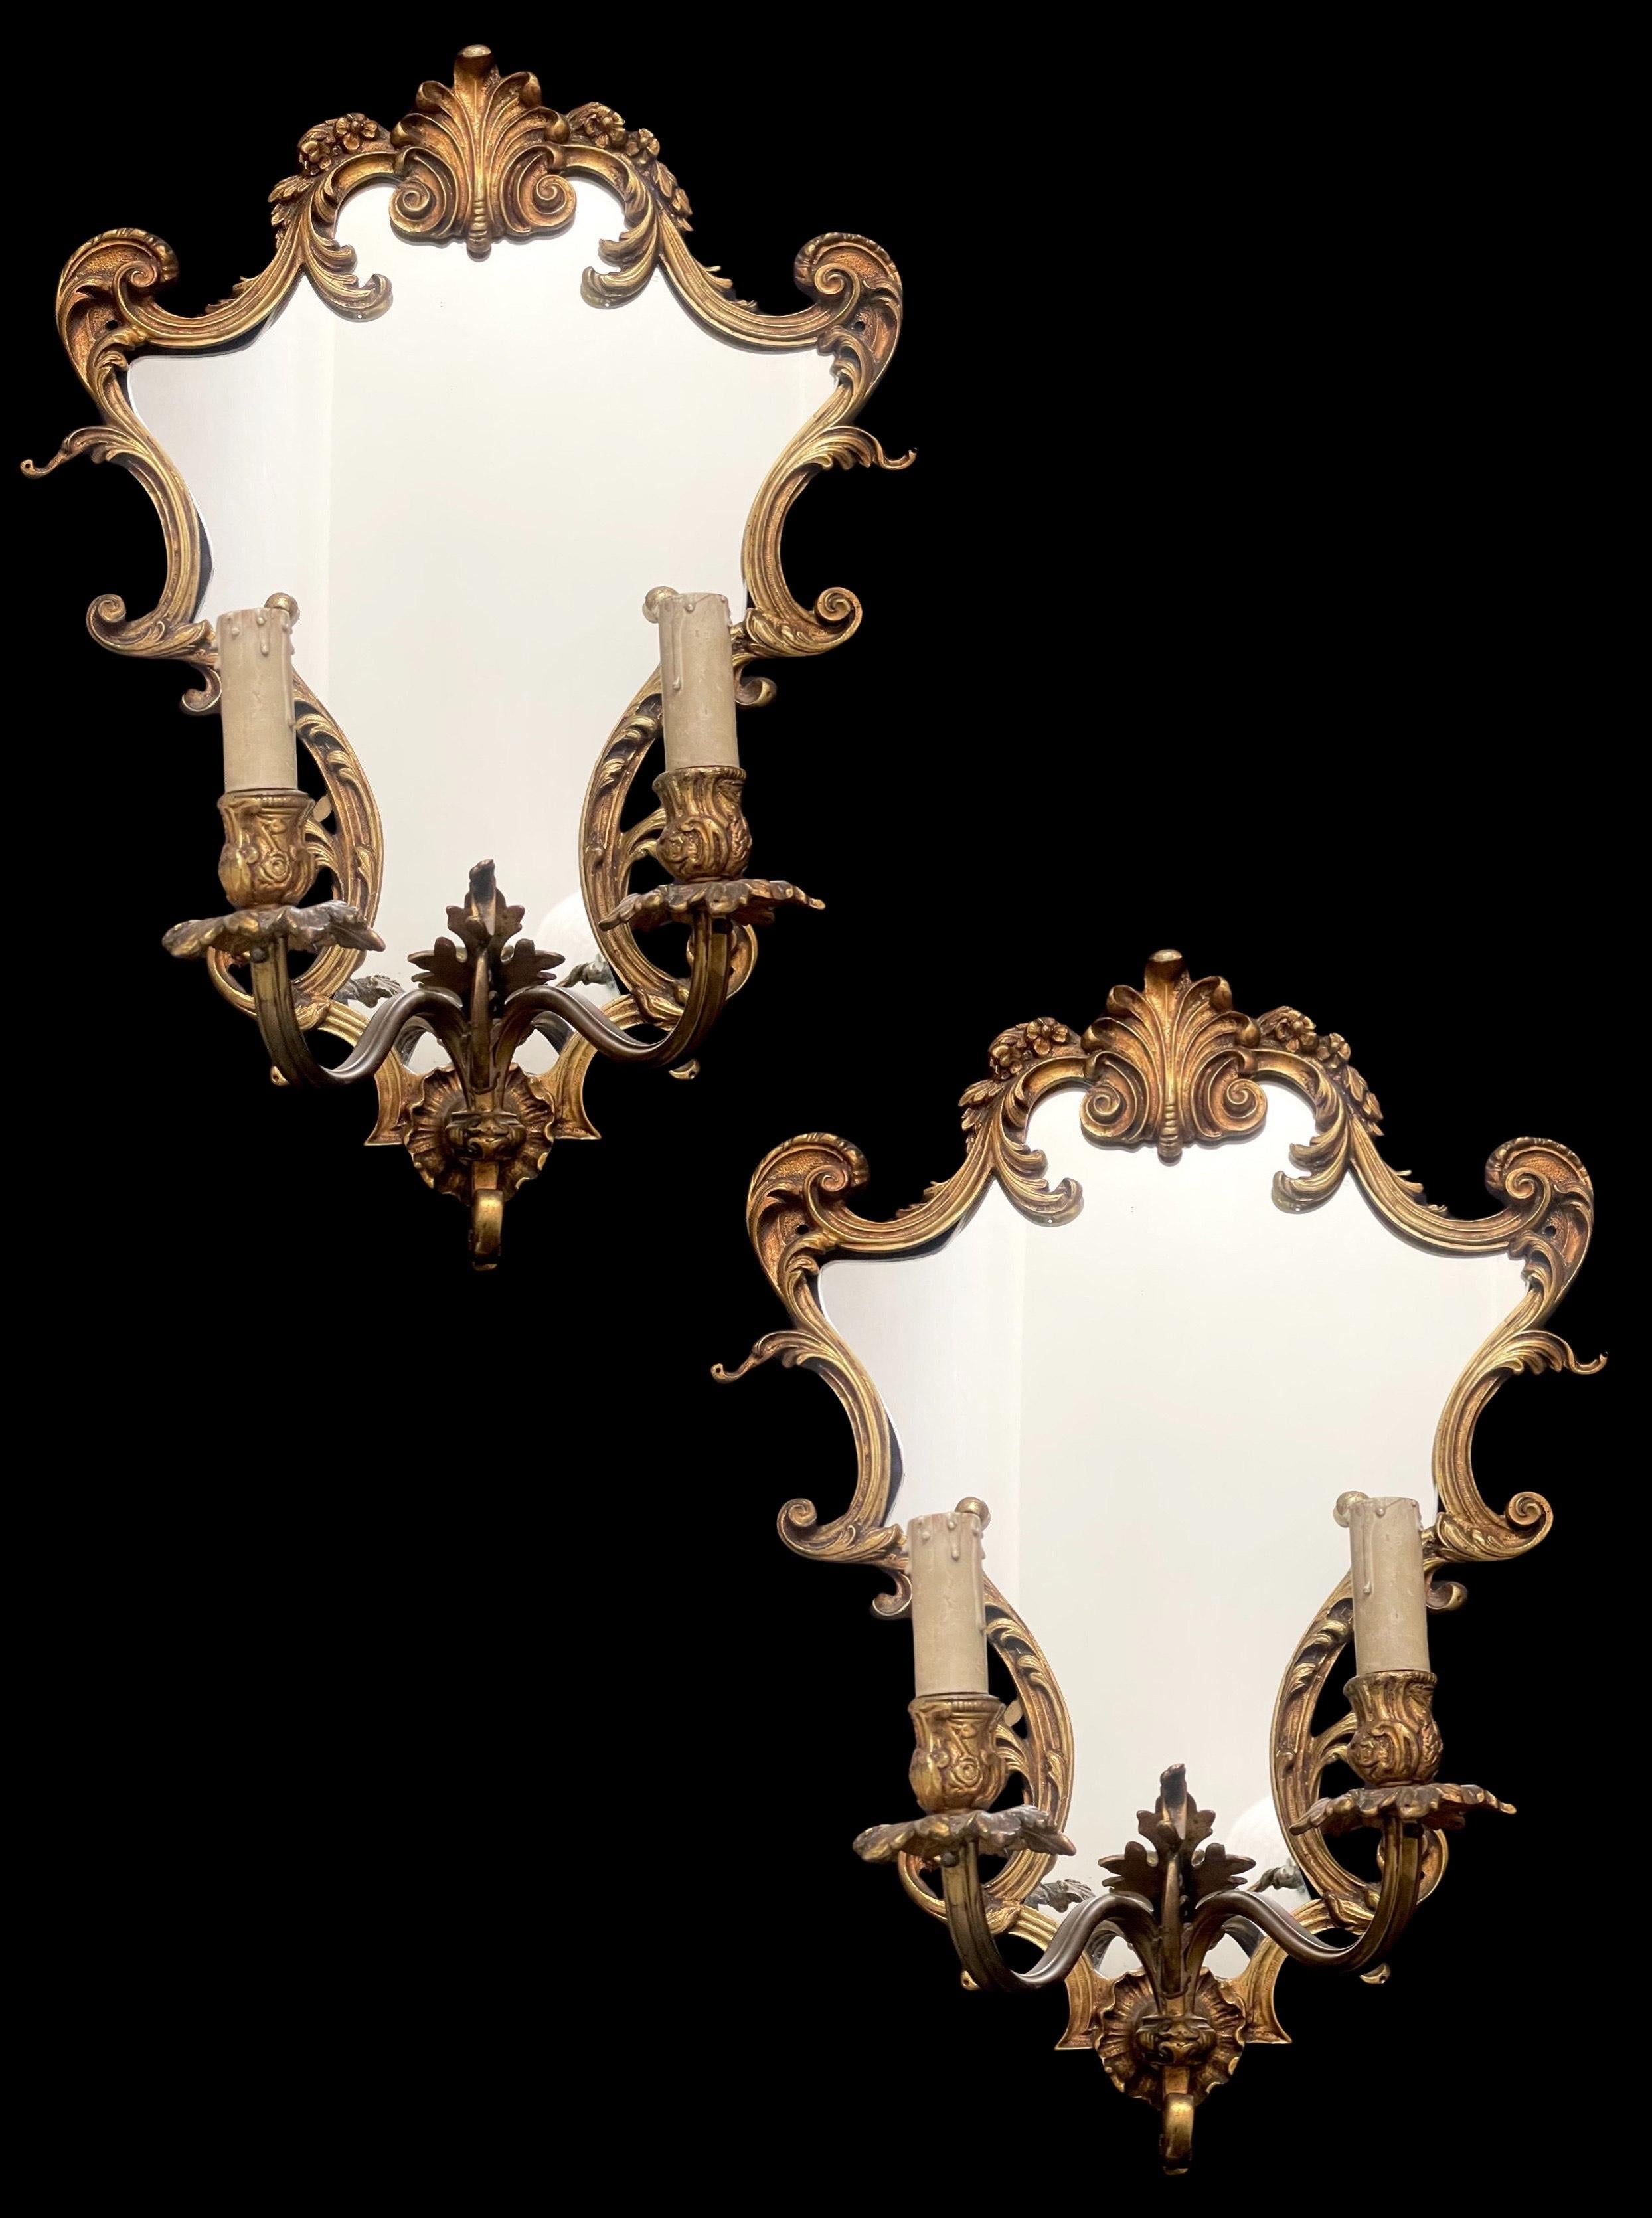 Admire the intricate beauty of the scrolling and curves that delicately frame the mirrored surface, showcasing the patina brass in all its vintage glory. Each curve and line tells a story of craftsmanship and artistry that transcends the